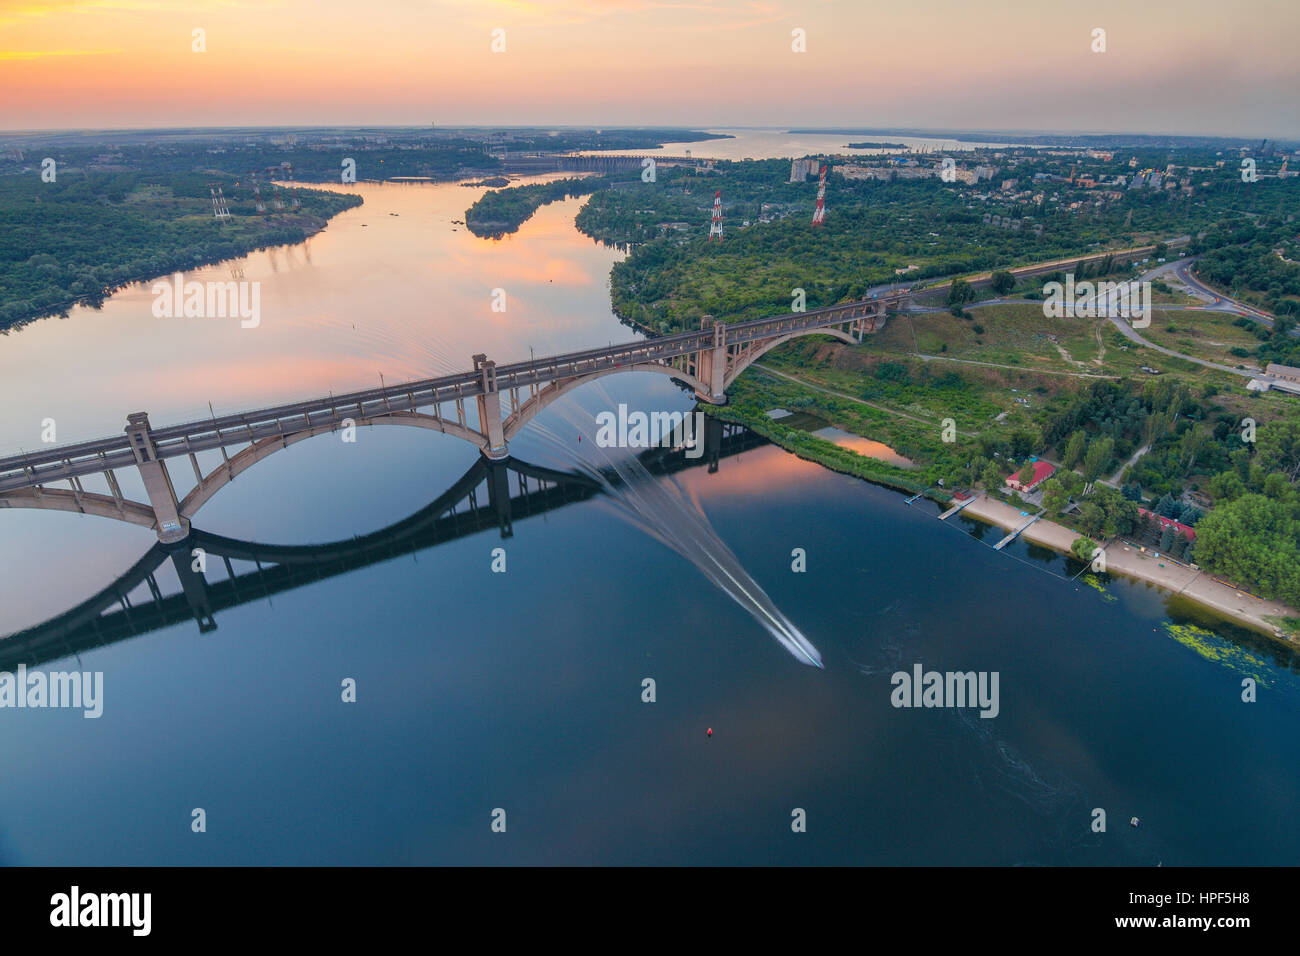 Evening view of Dnieper river and Preobrazhensky arched bridge from the height of 180m, with motor boat floating in water, Zaporozhye, Ukraine Stock Photo